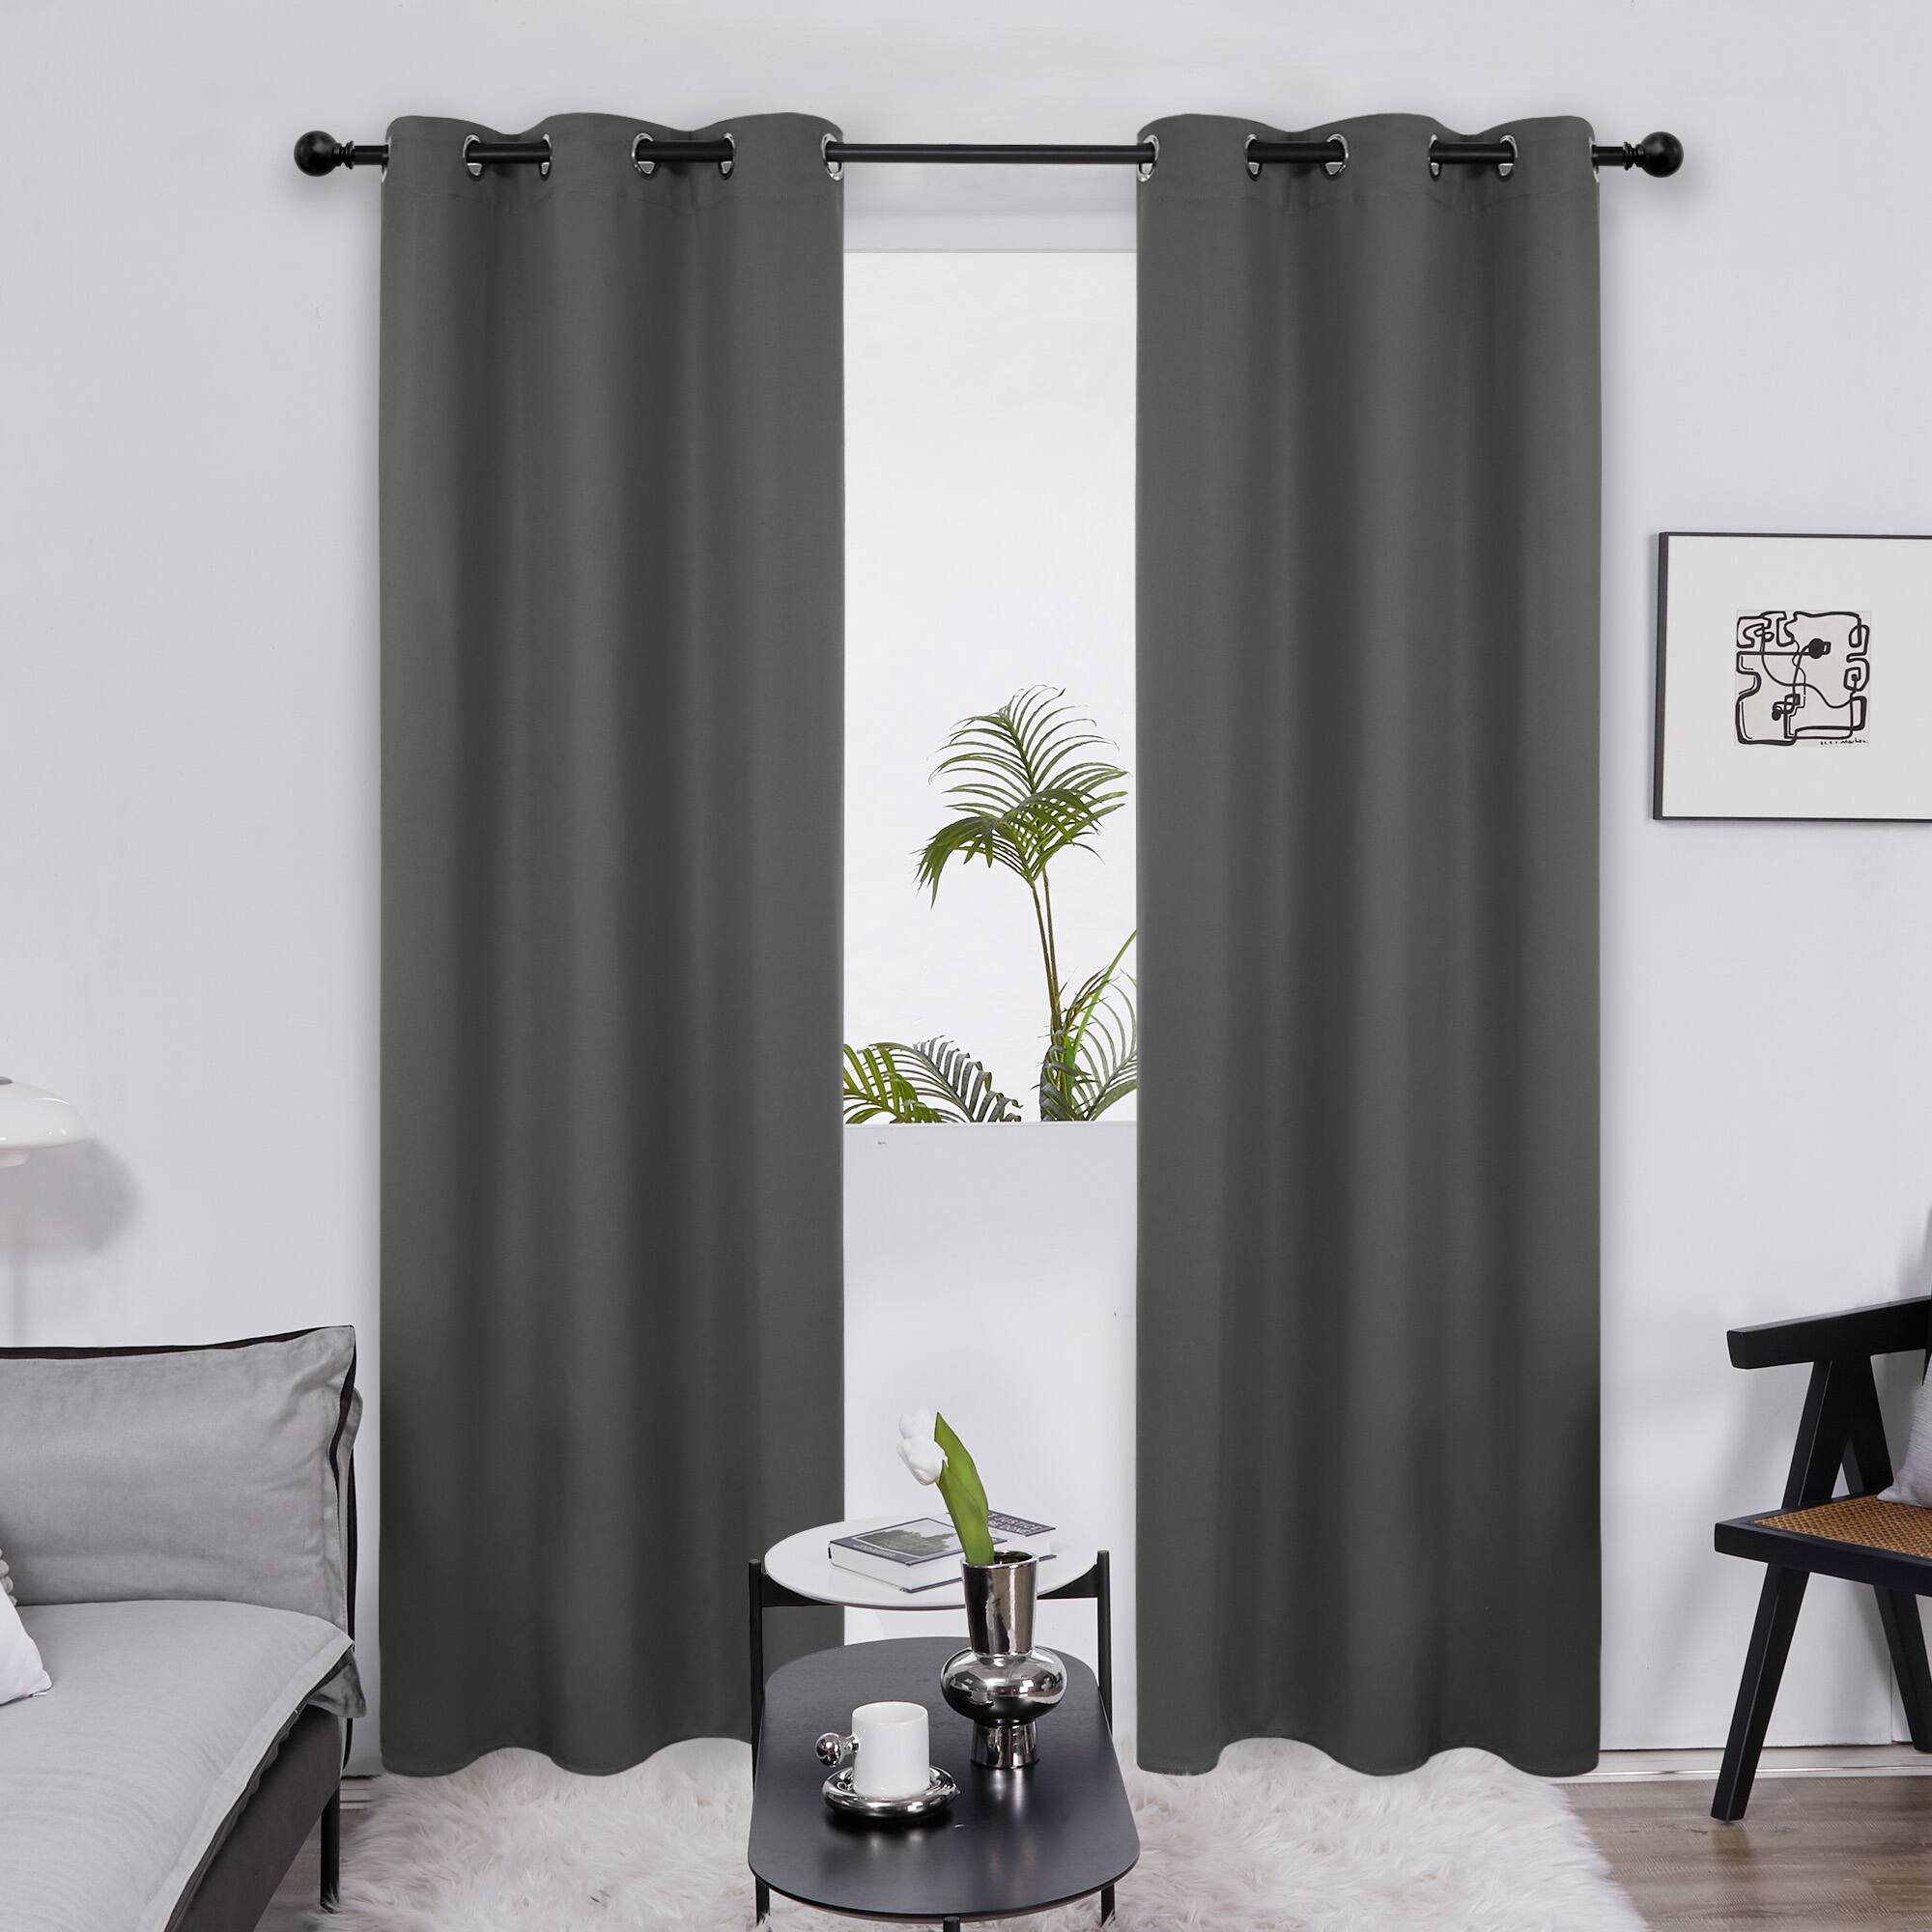 Deconovo 42 Inches Wide Solid Blackout Curtains 2 Panels -$7.97 + Free Shipping w/ Prime